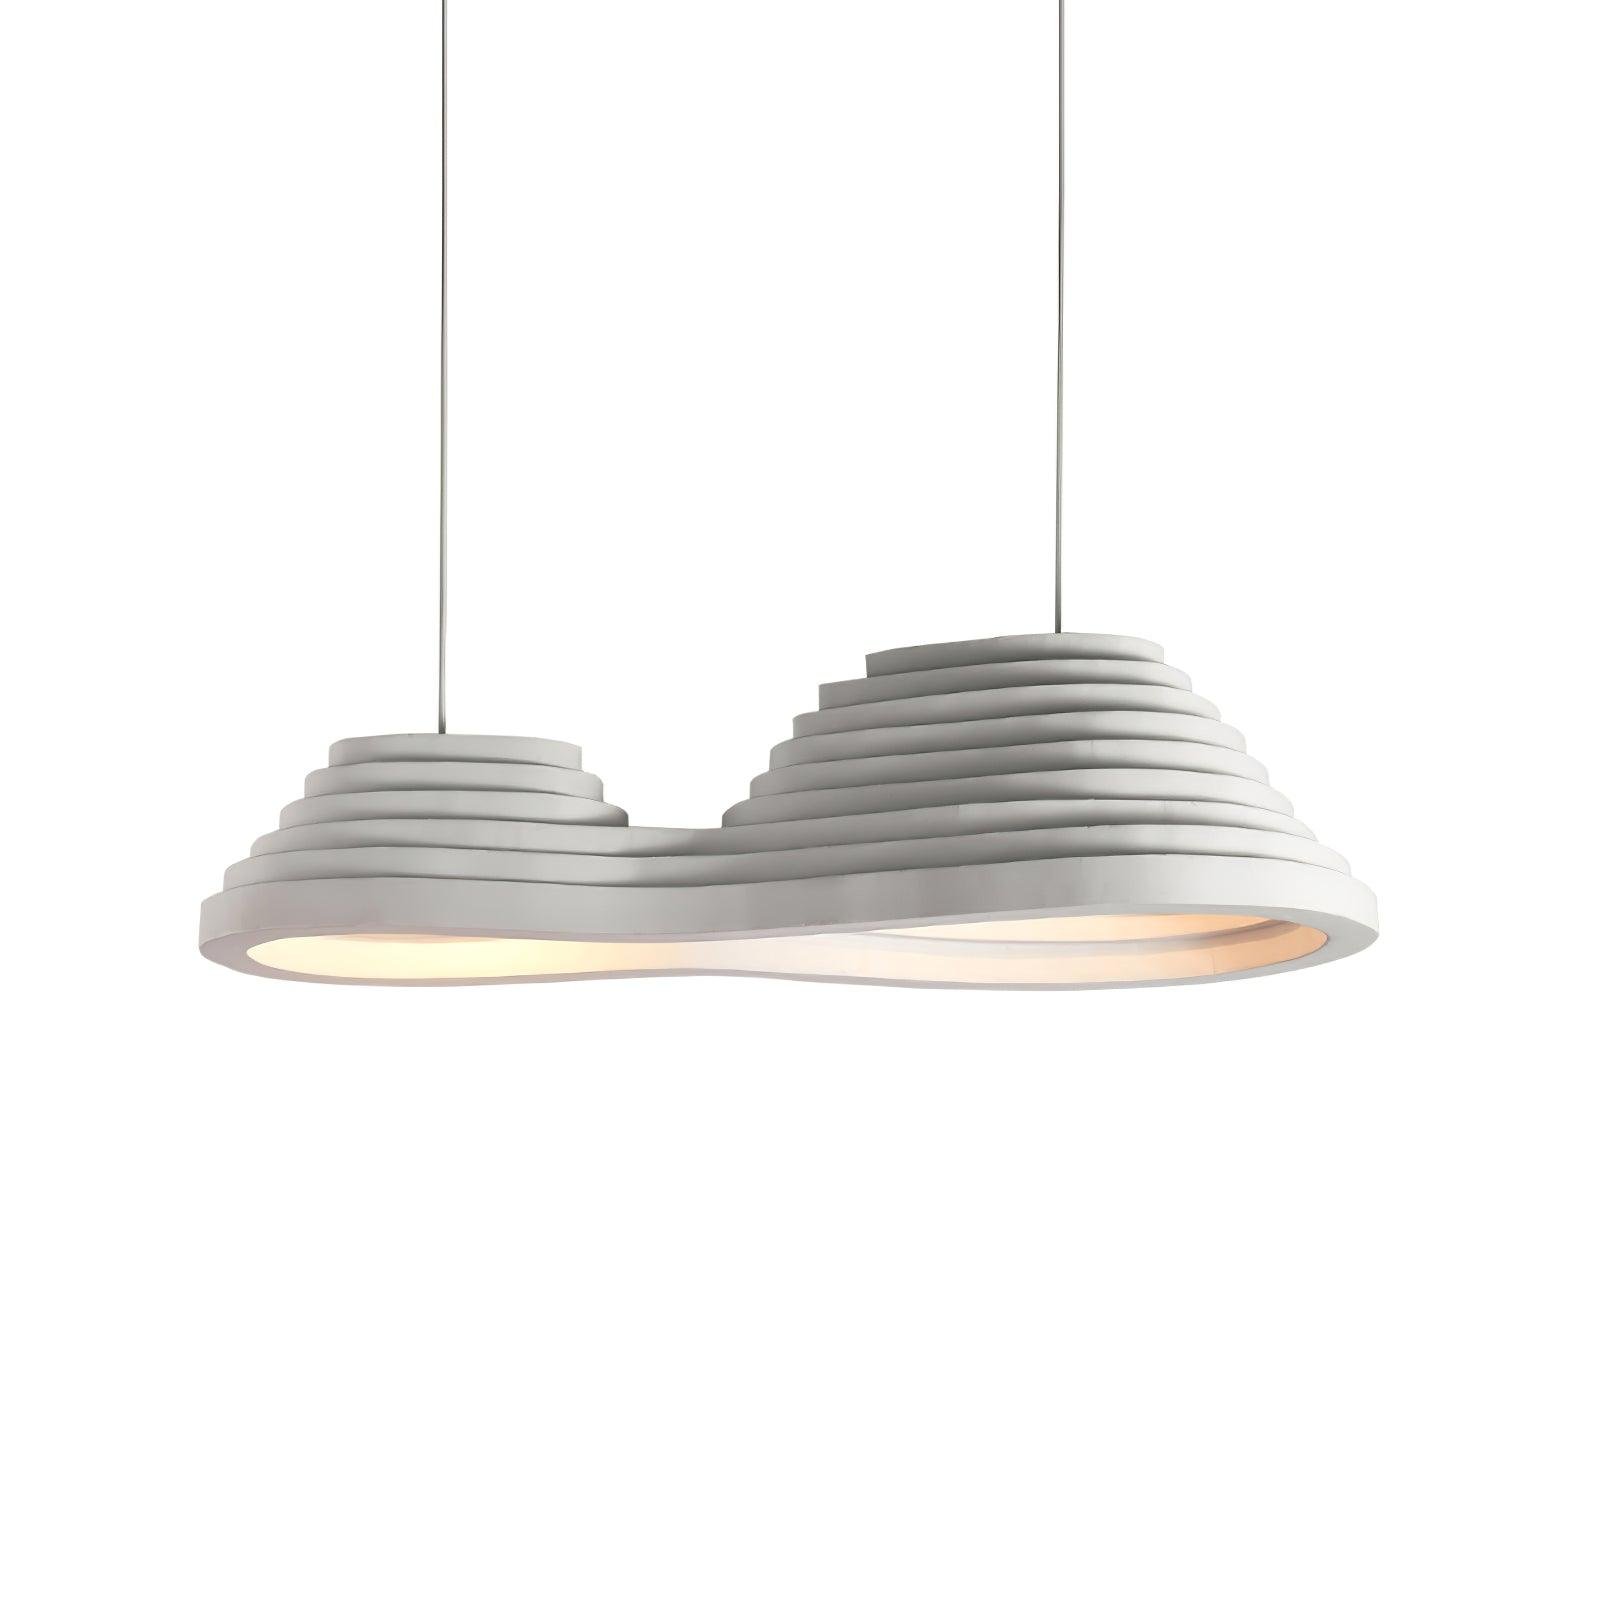 Acoustic Pendant Lamp with Rice Field Design, Gray White Color, Diameter 39.4" x Height 10.6" (100cm x 27cm)